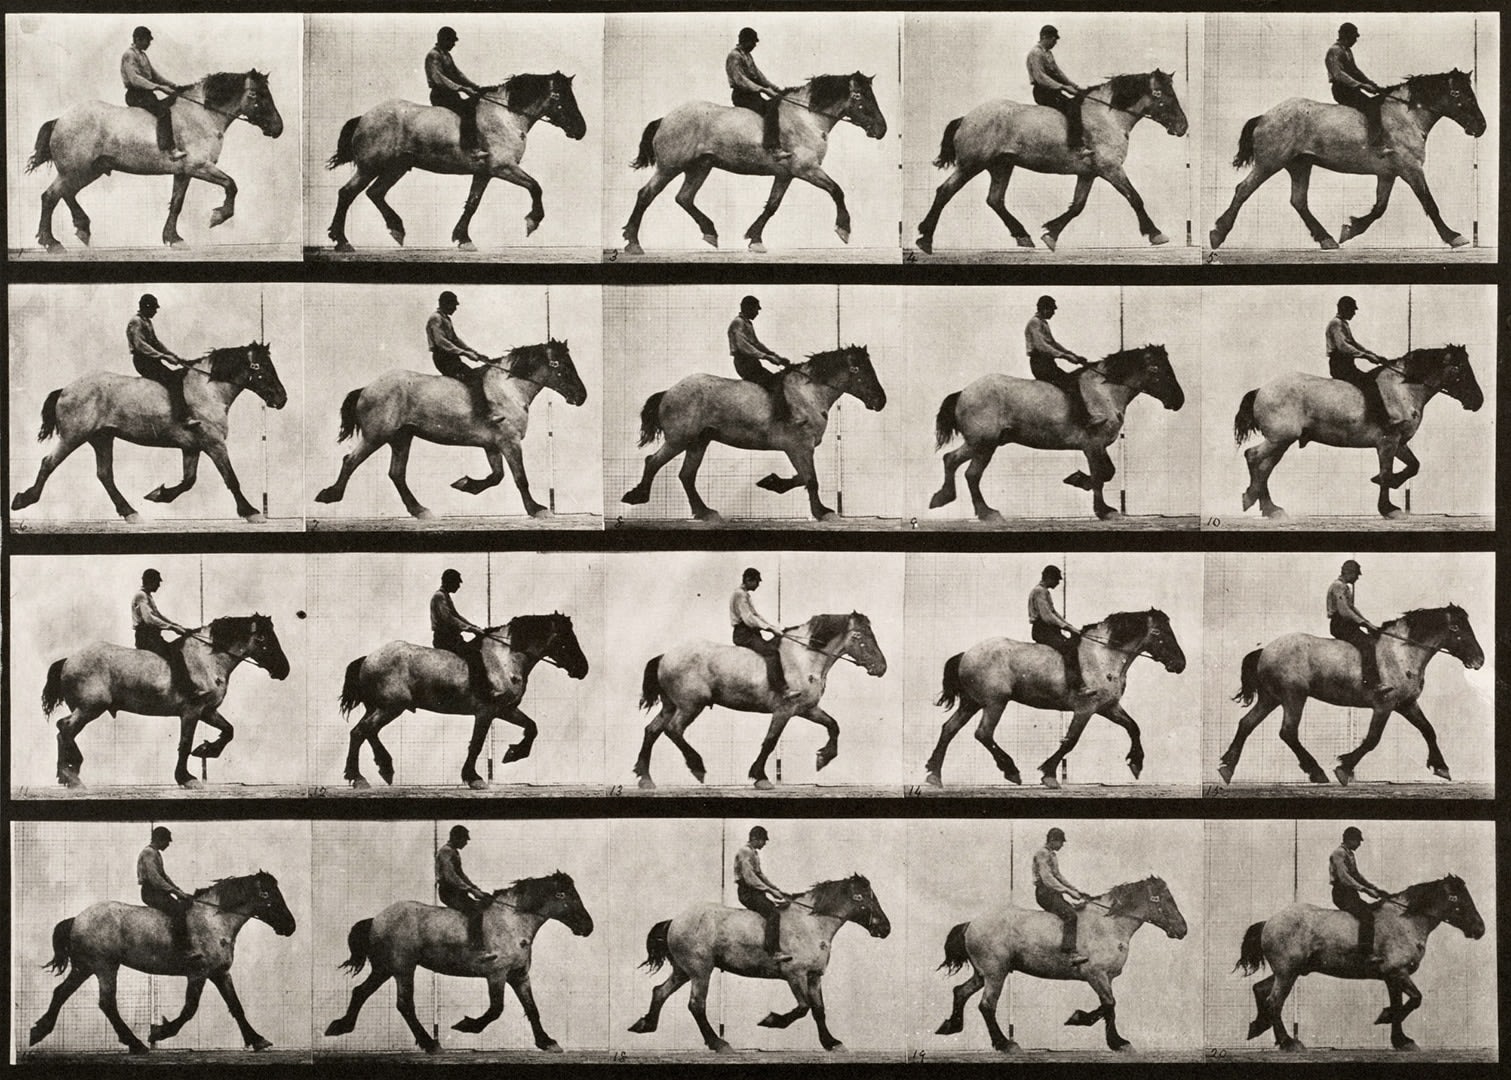 Sequence of black and white photos showing the movements of a large walking horse with a rider